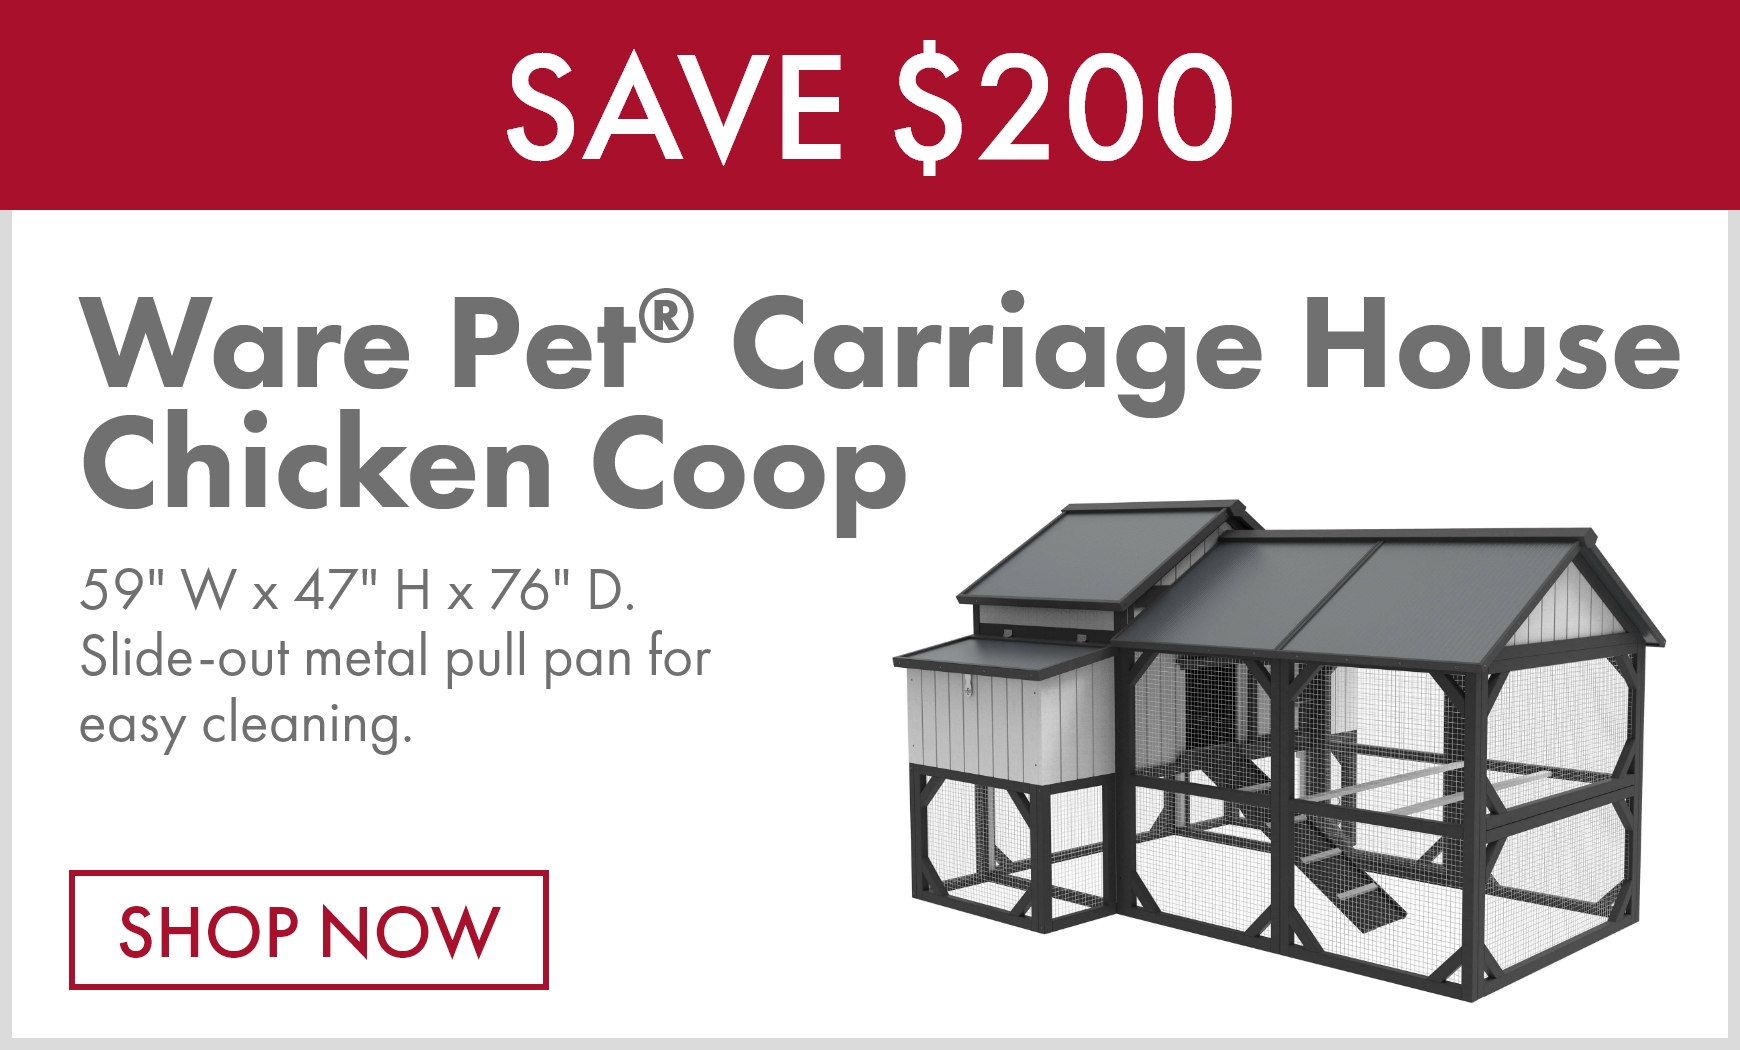 Ware Pet® Carriage House Chicken Coop